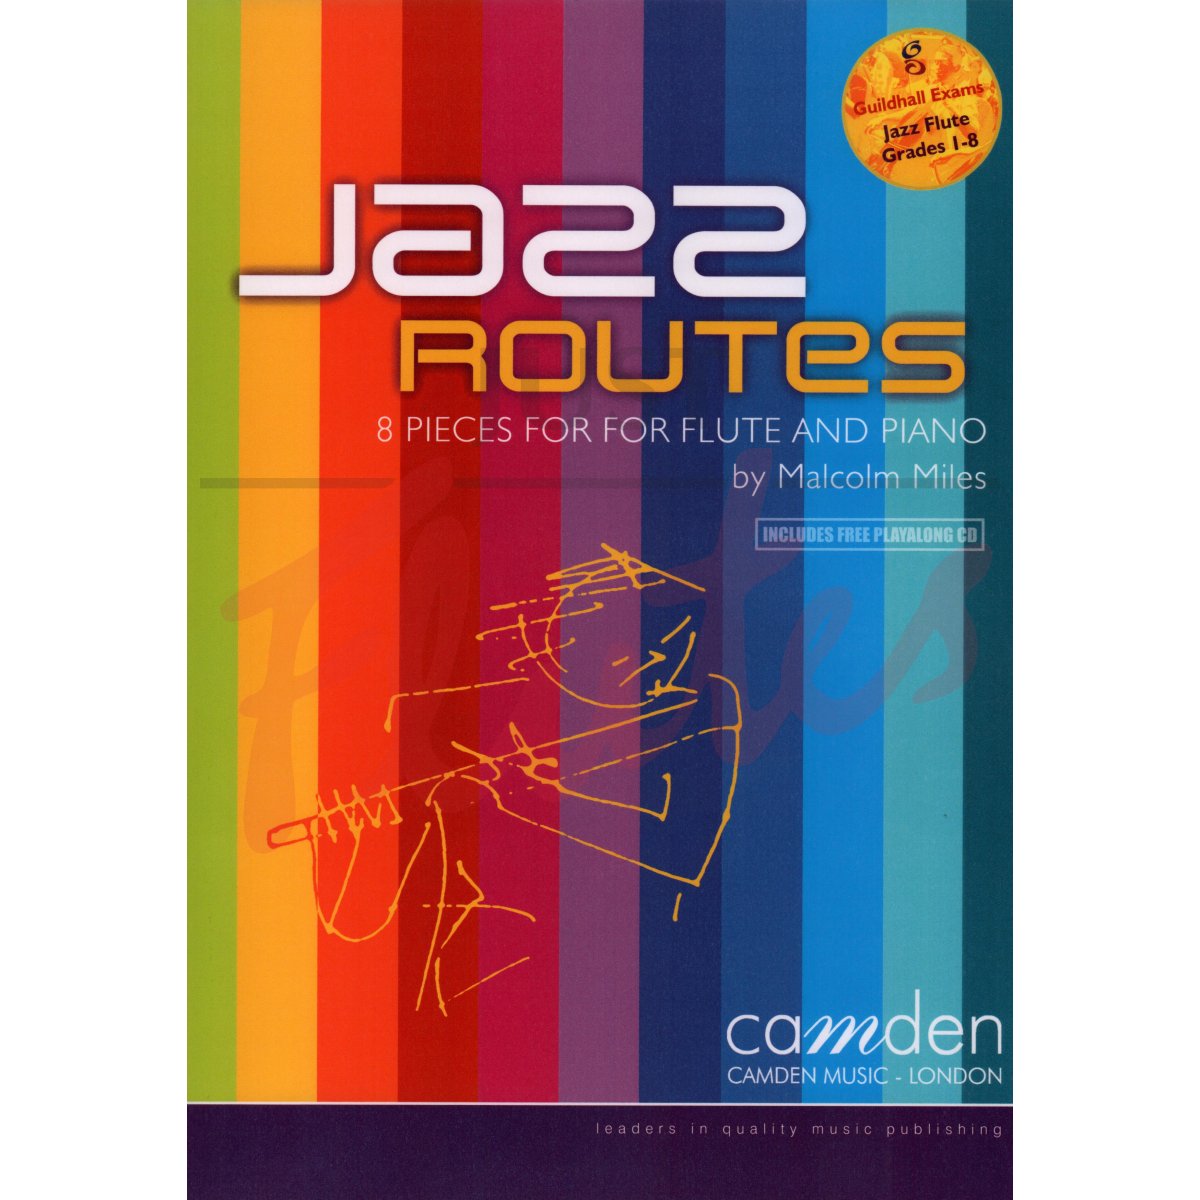 Jazz Routes: 8 Pieces for Flute and Piano